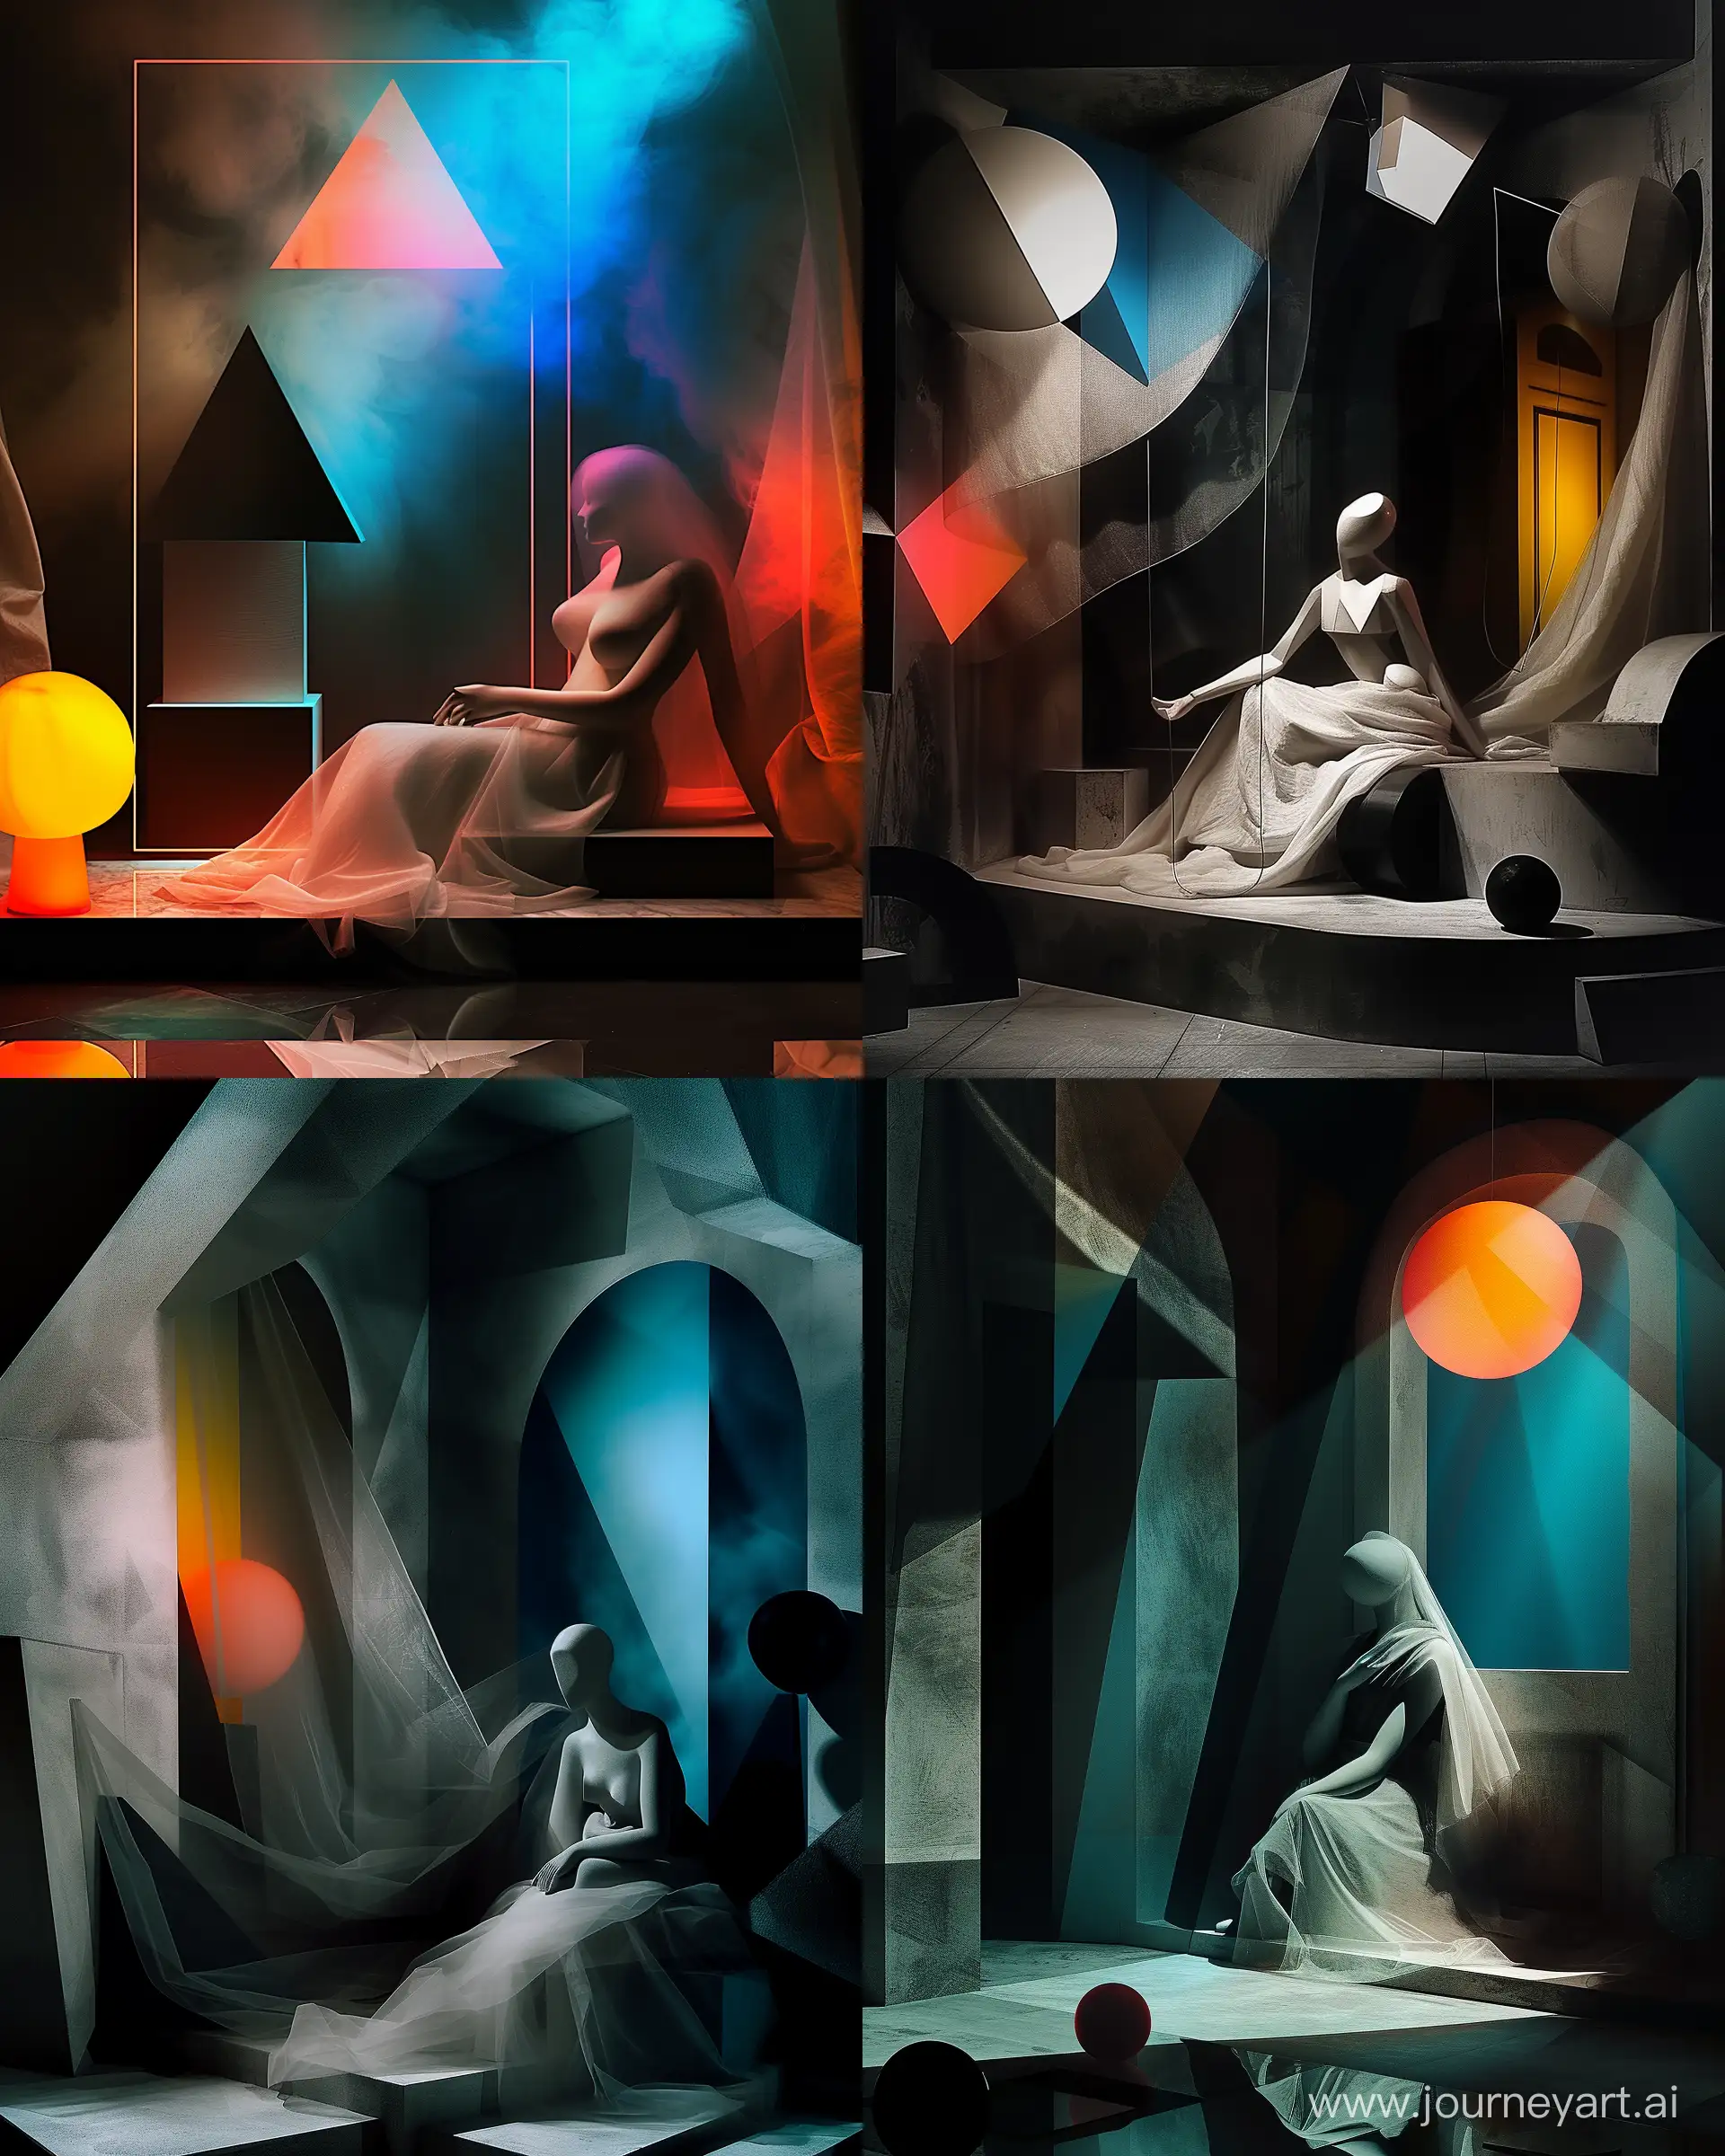 Mysterious-Geometric-Staged-Photography-Inspired-by-Picasso